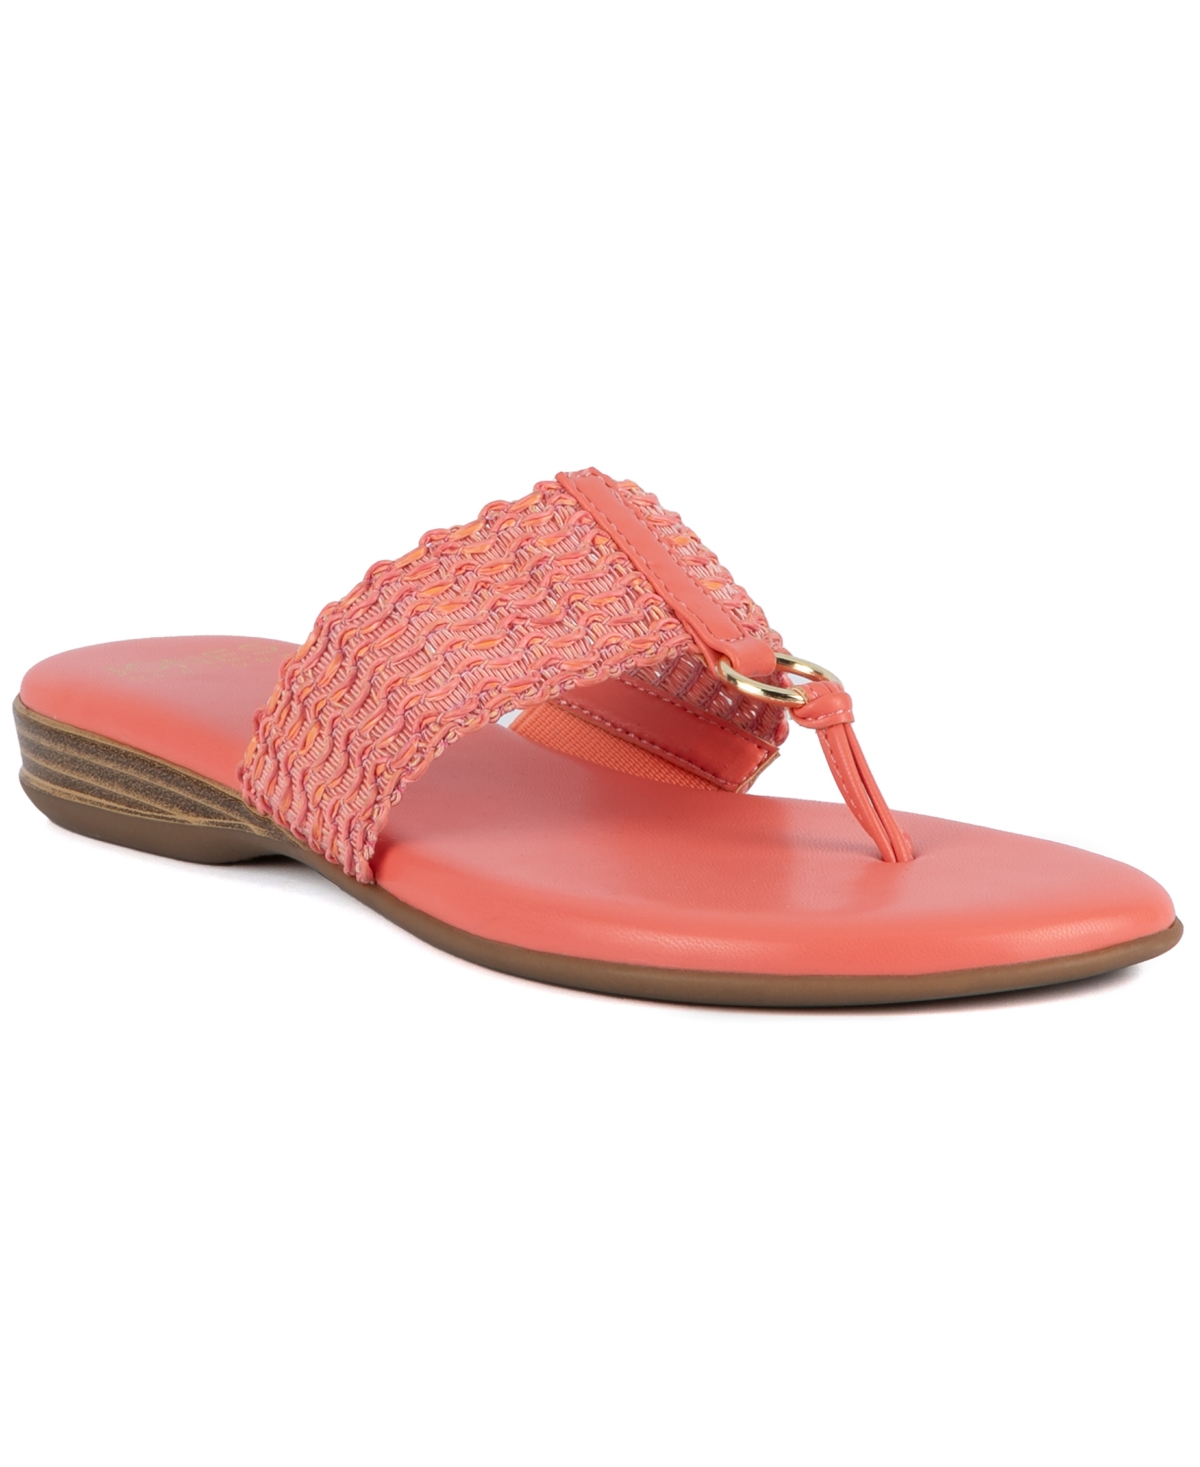 Sonal Woven Thong Sandals, Created for Macy's - Coral